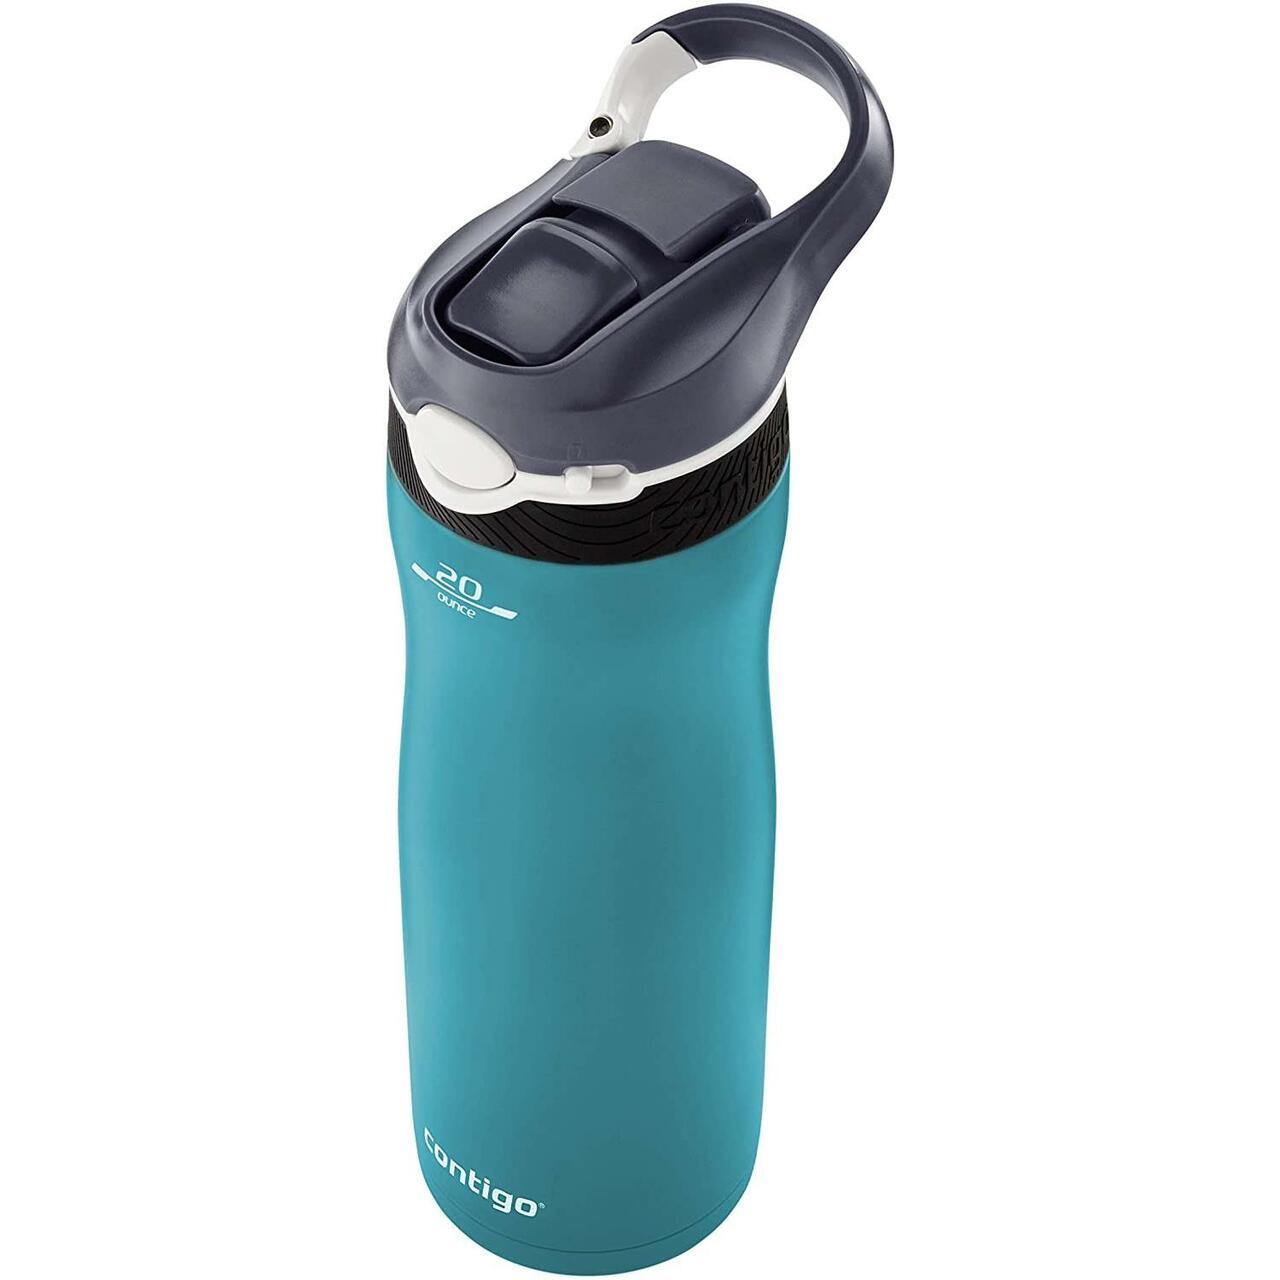 Contigo Autospout Ashland Chill Vacuum Insulated Stainless Steel Water Bottle Scuba - Whole and All